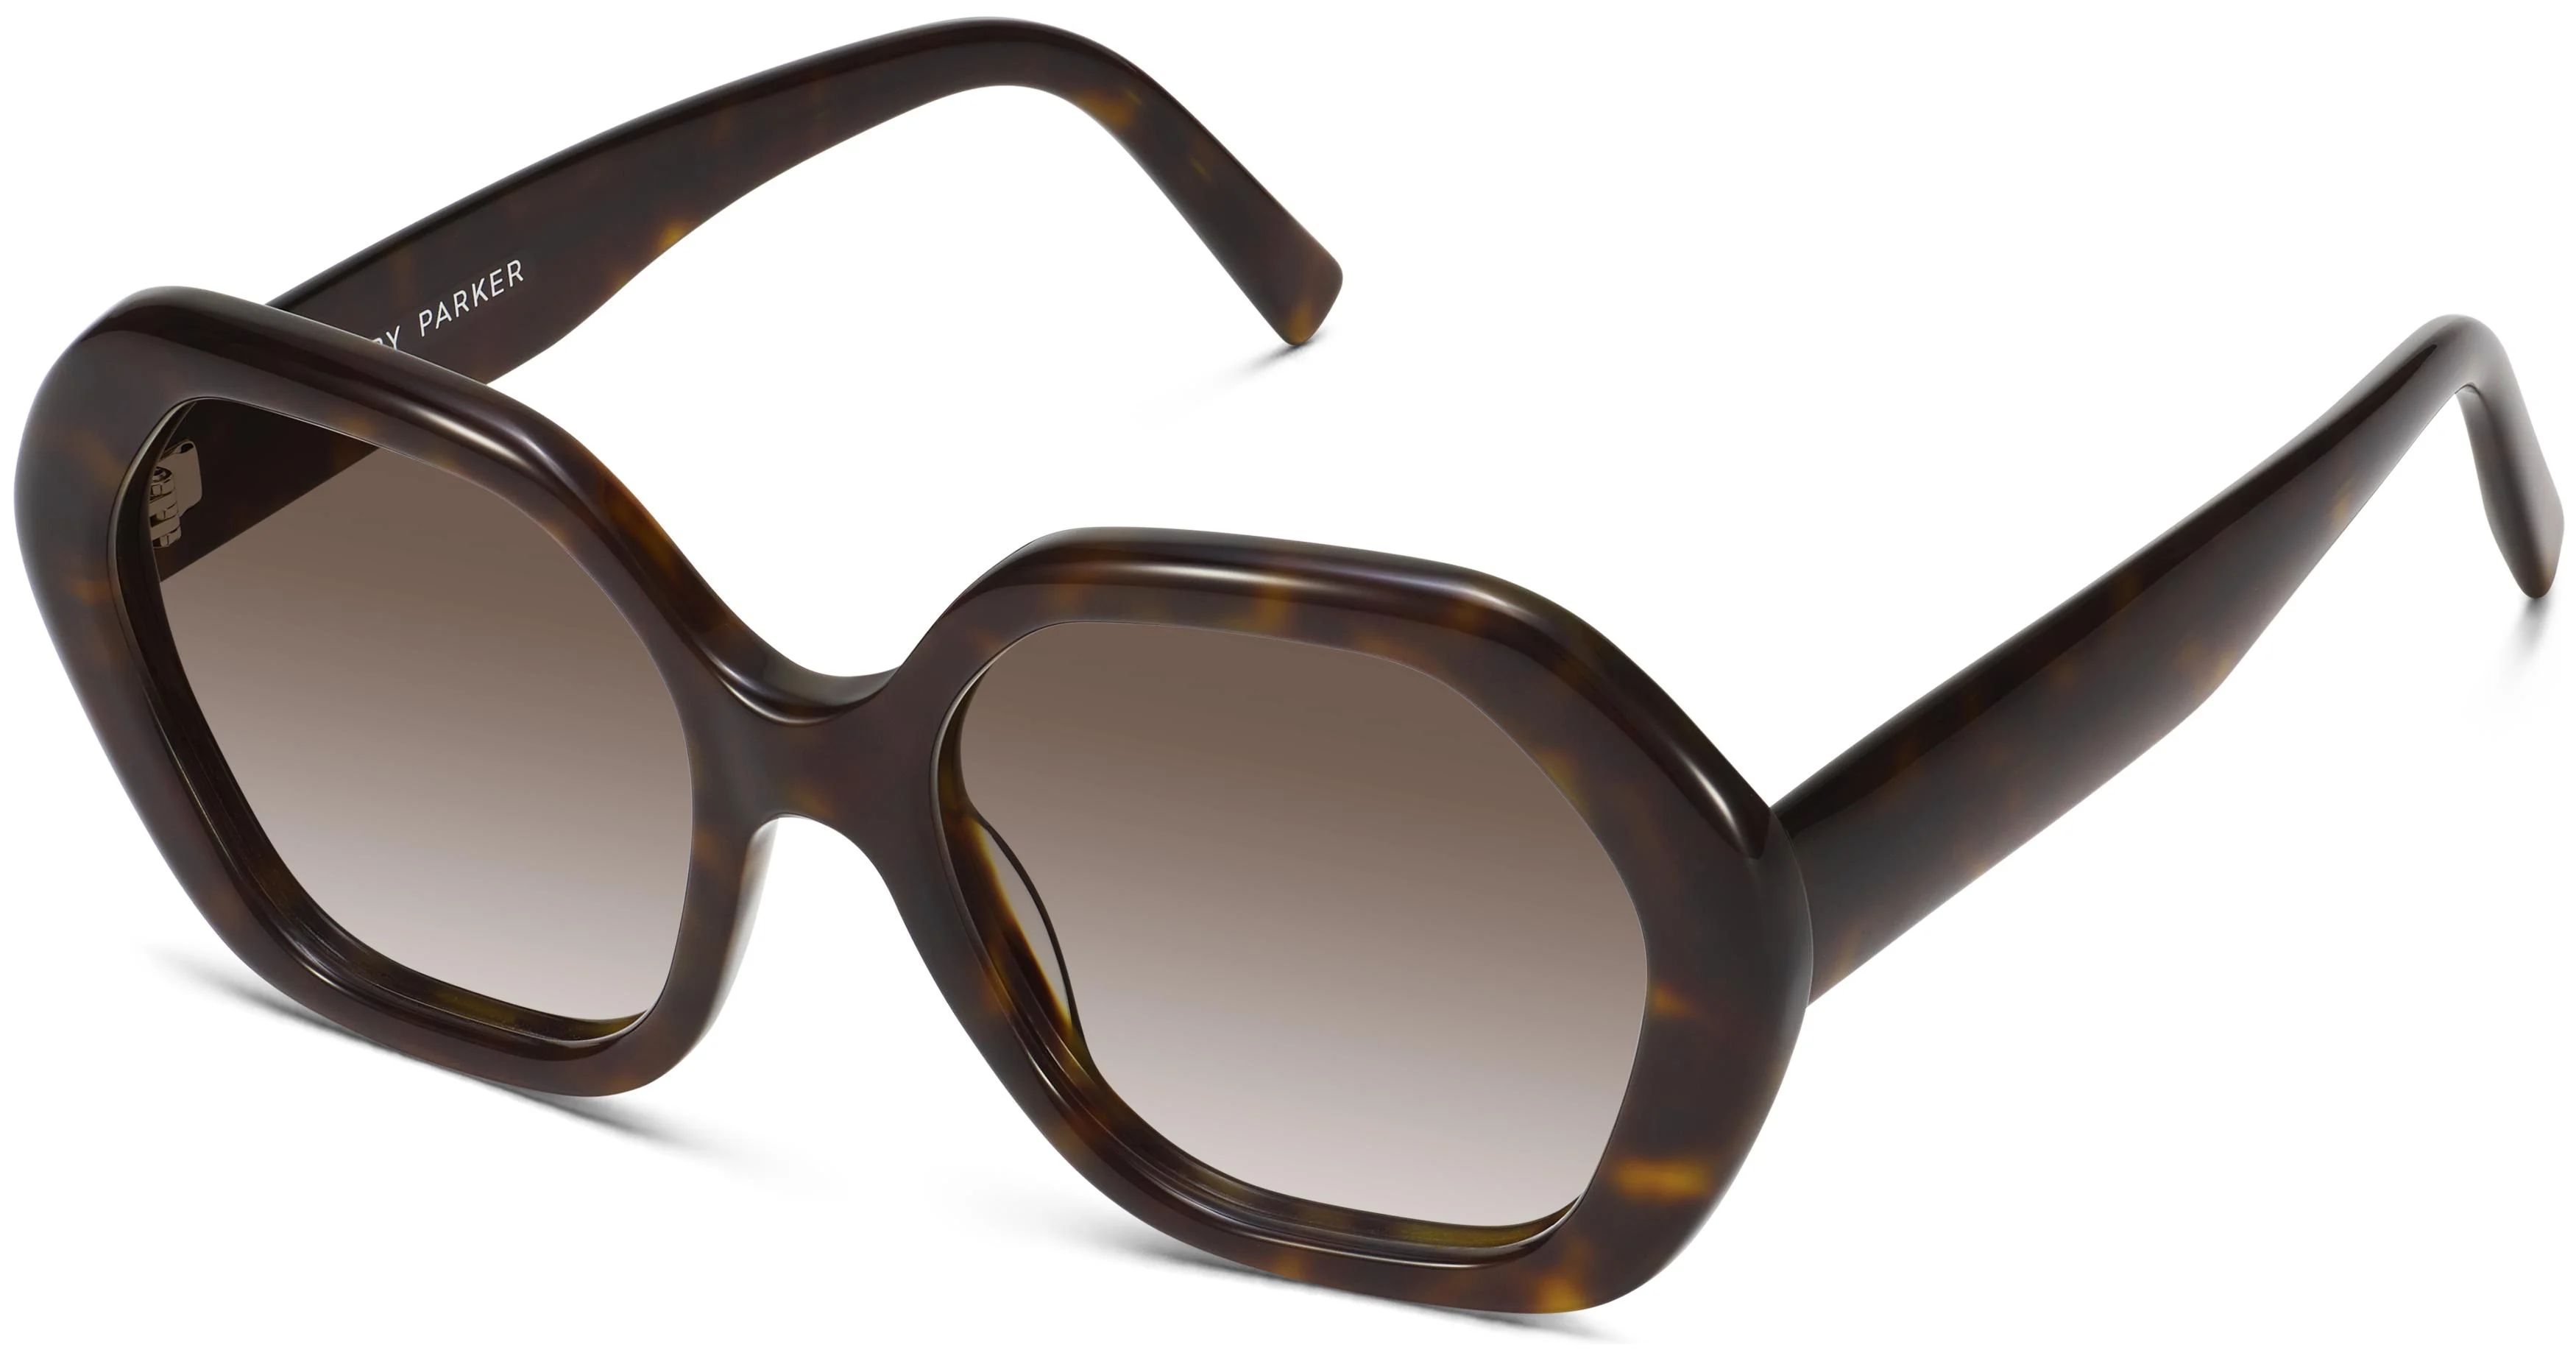 Estrada Sunglasses in Ristretto Tortoise | Warby Parker | Warby Parker (US)